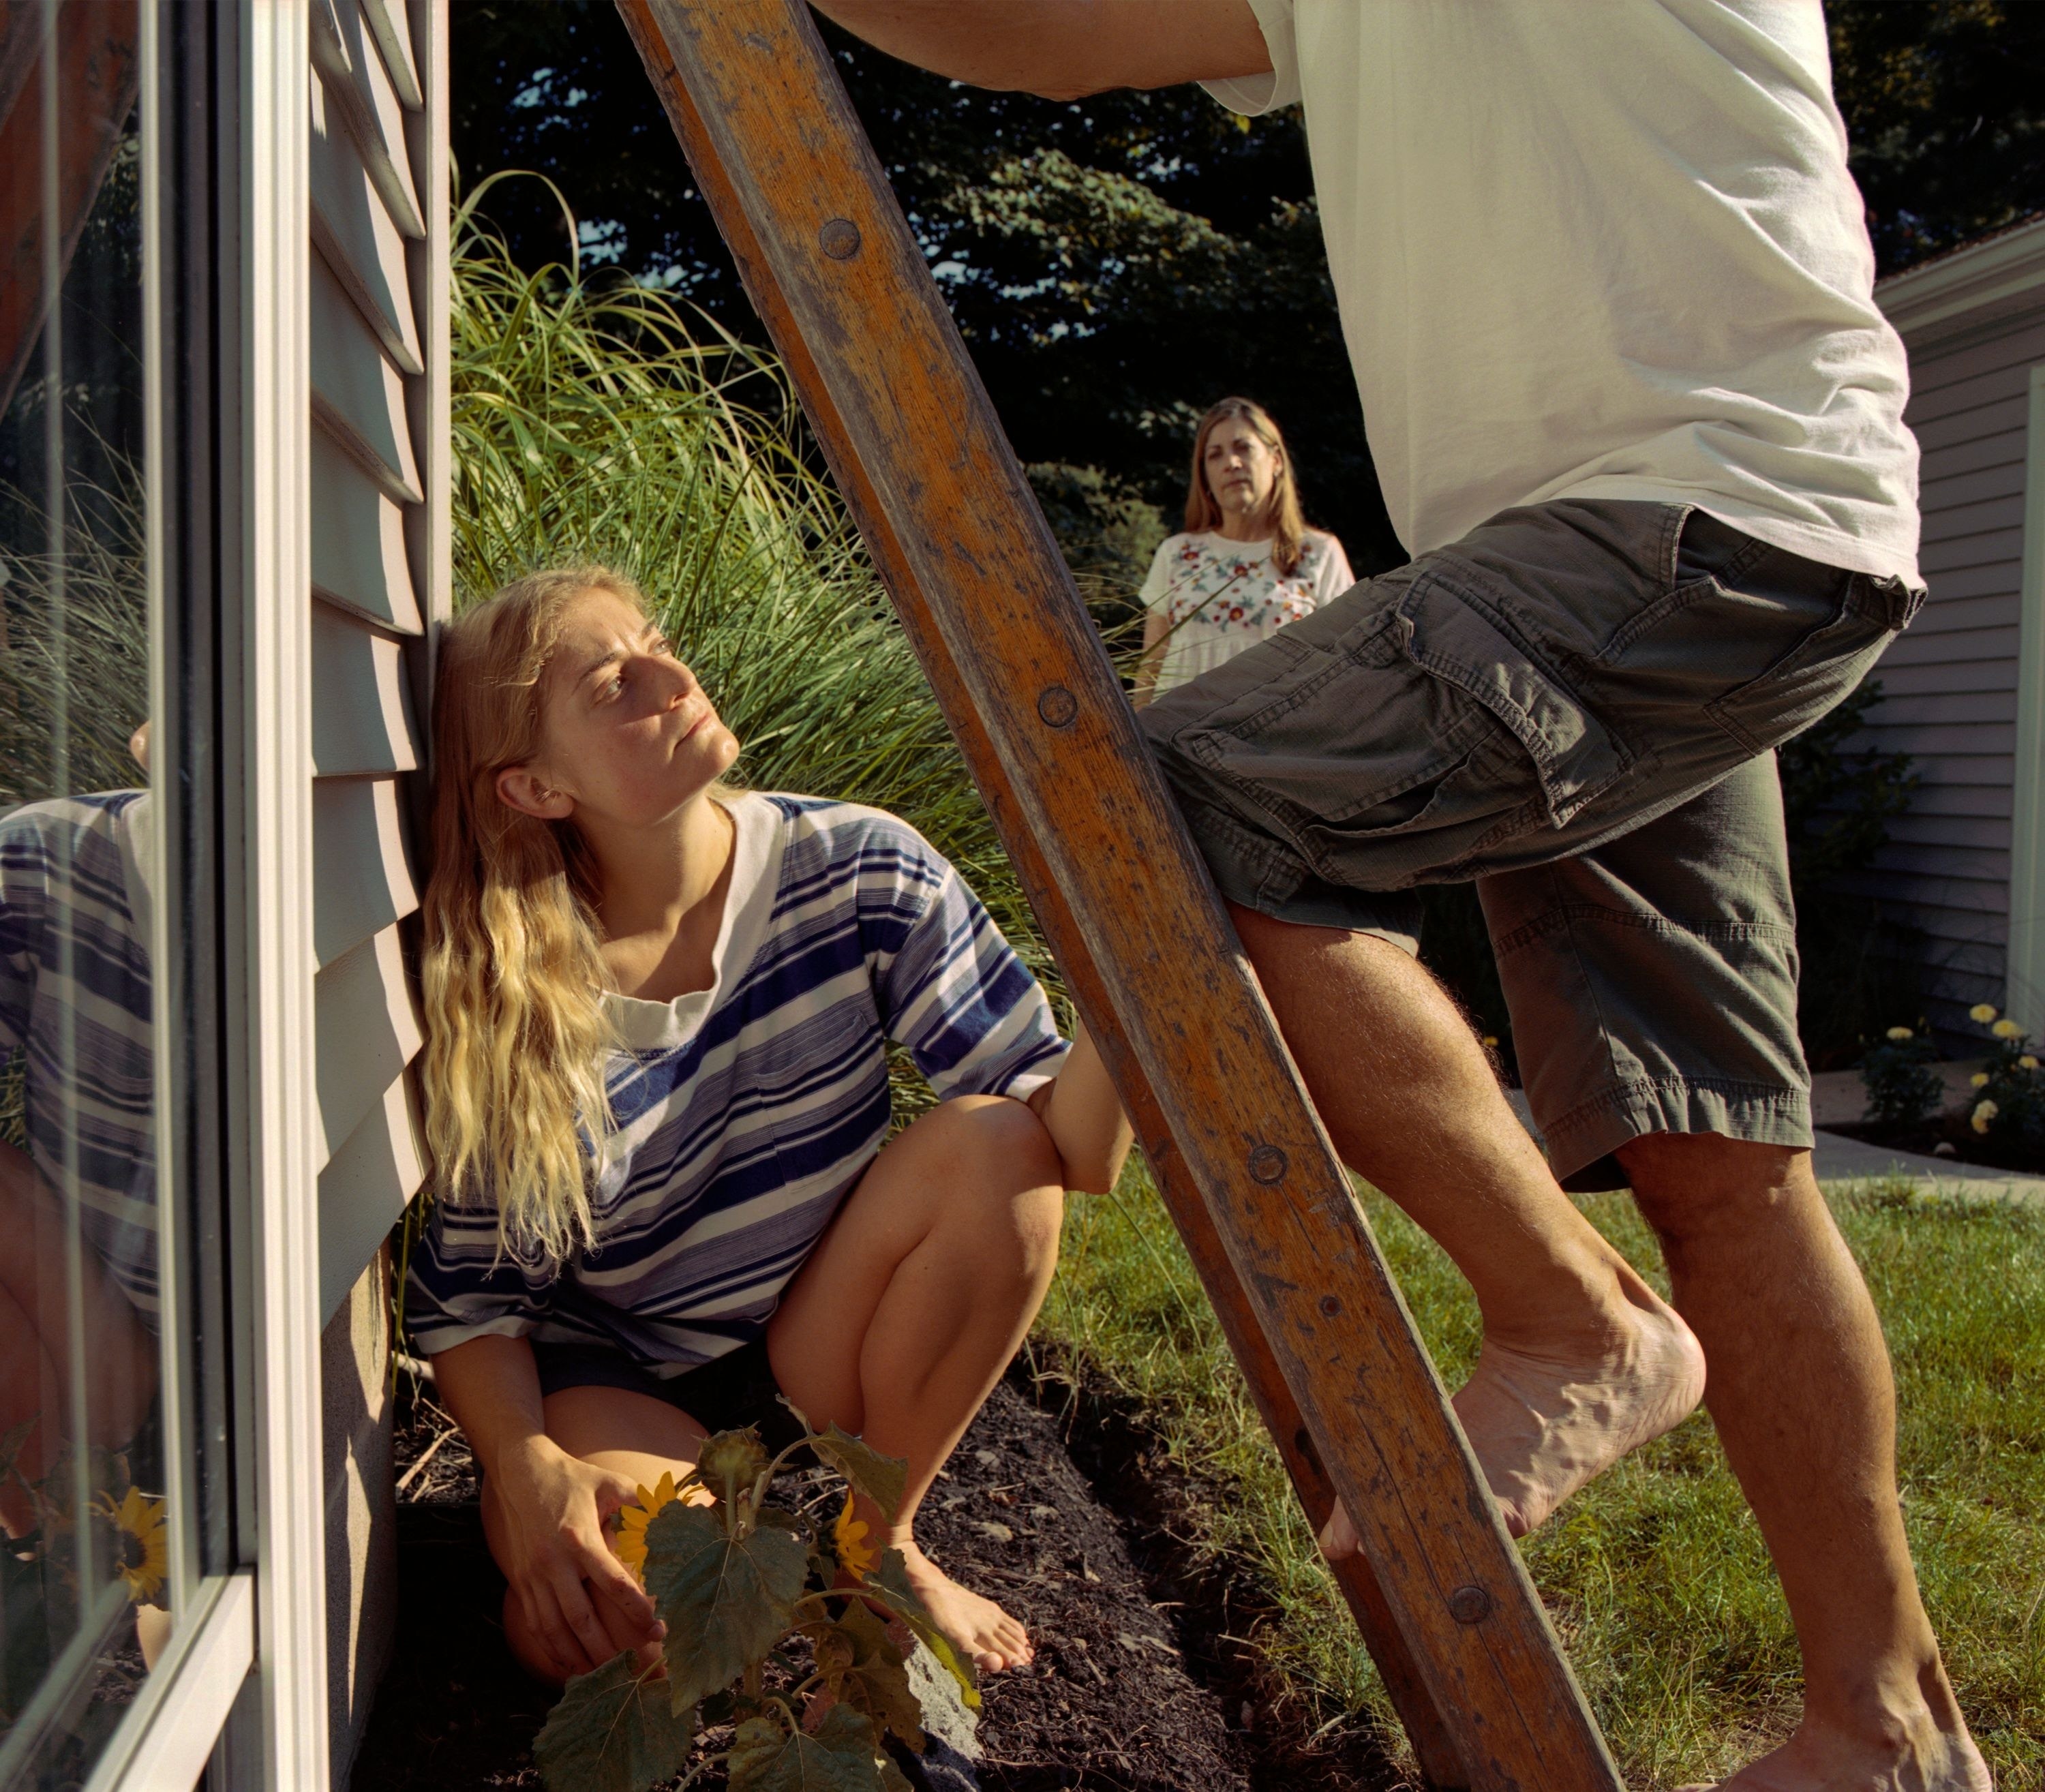 A barefoot woman kneels in the soil by the side of a house and looks up at a barefoot man climbing a ladder up against the house